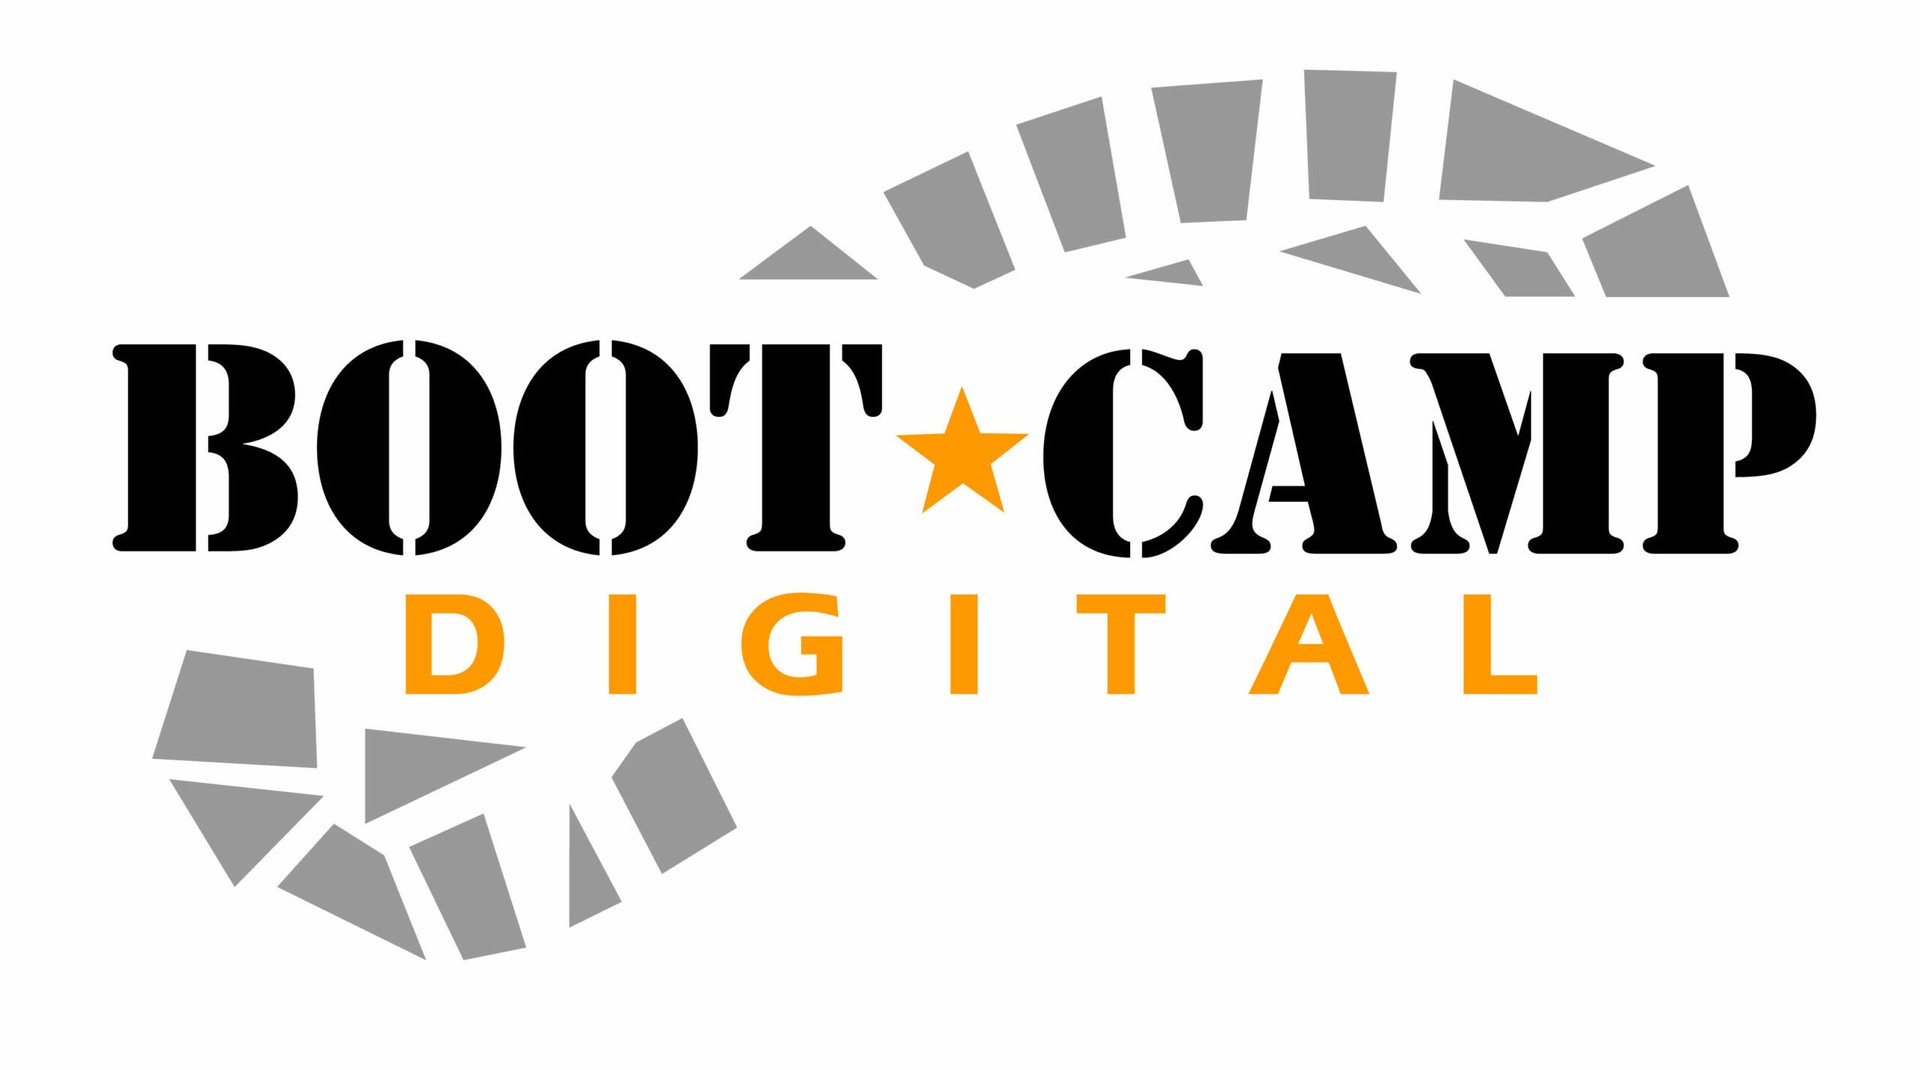 Digital marketing courses in Montreal - Bootcamp logo